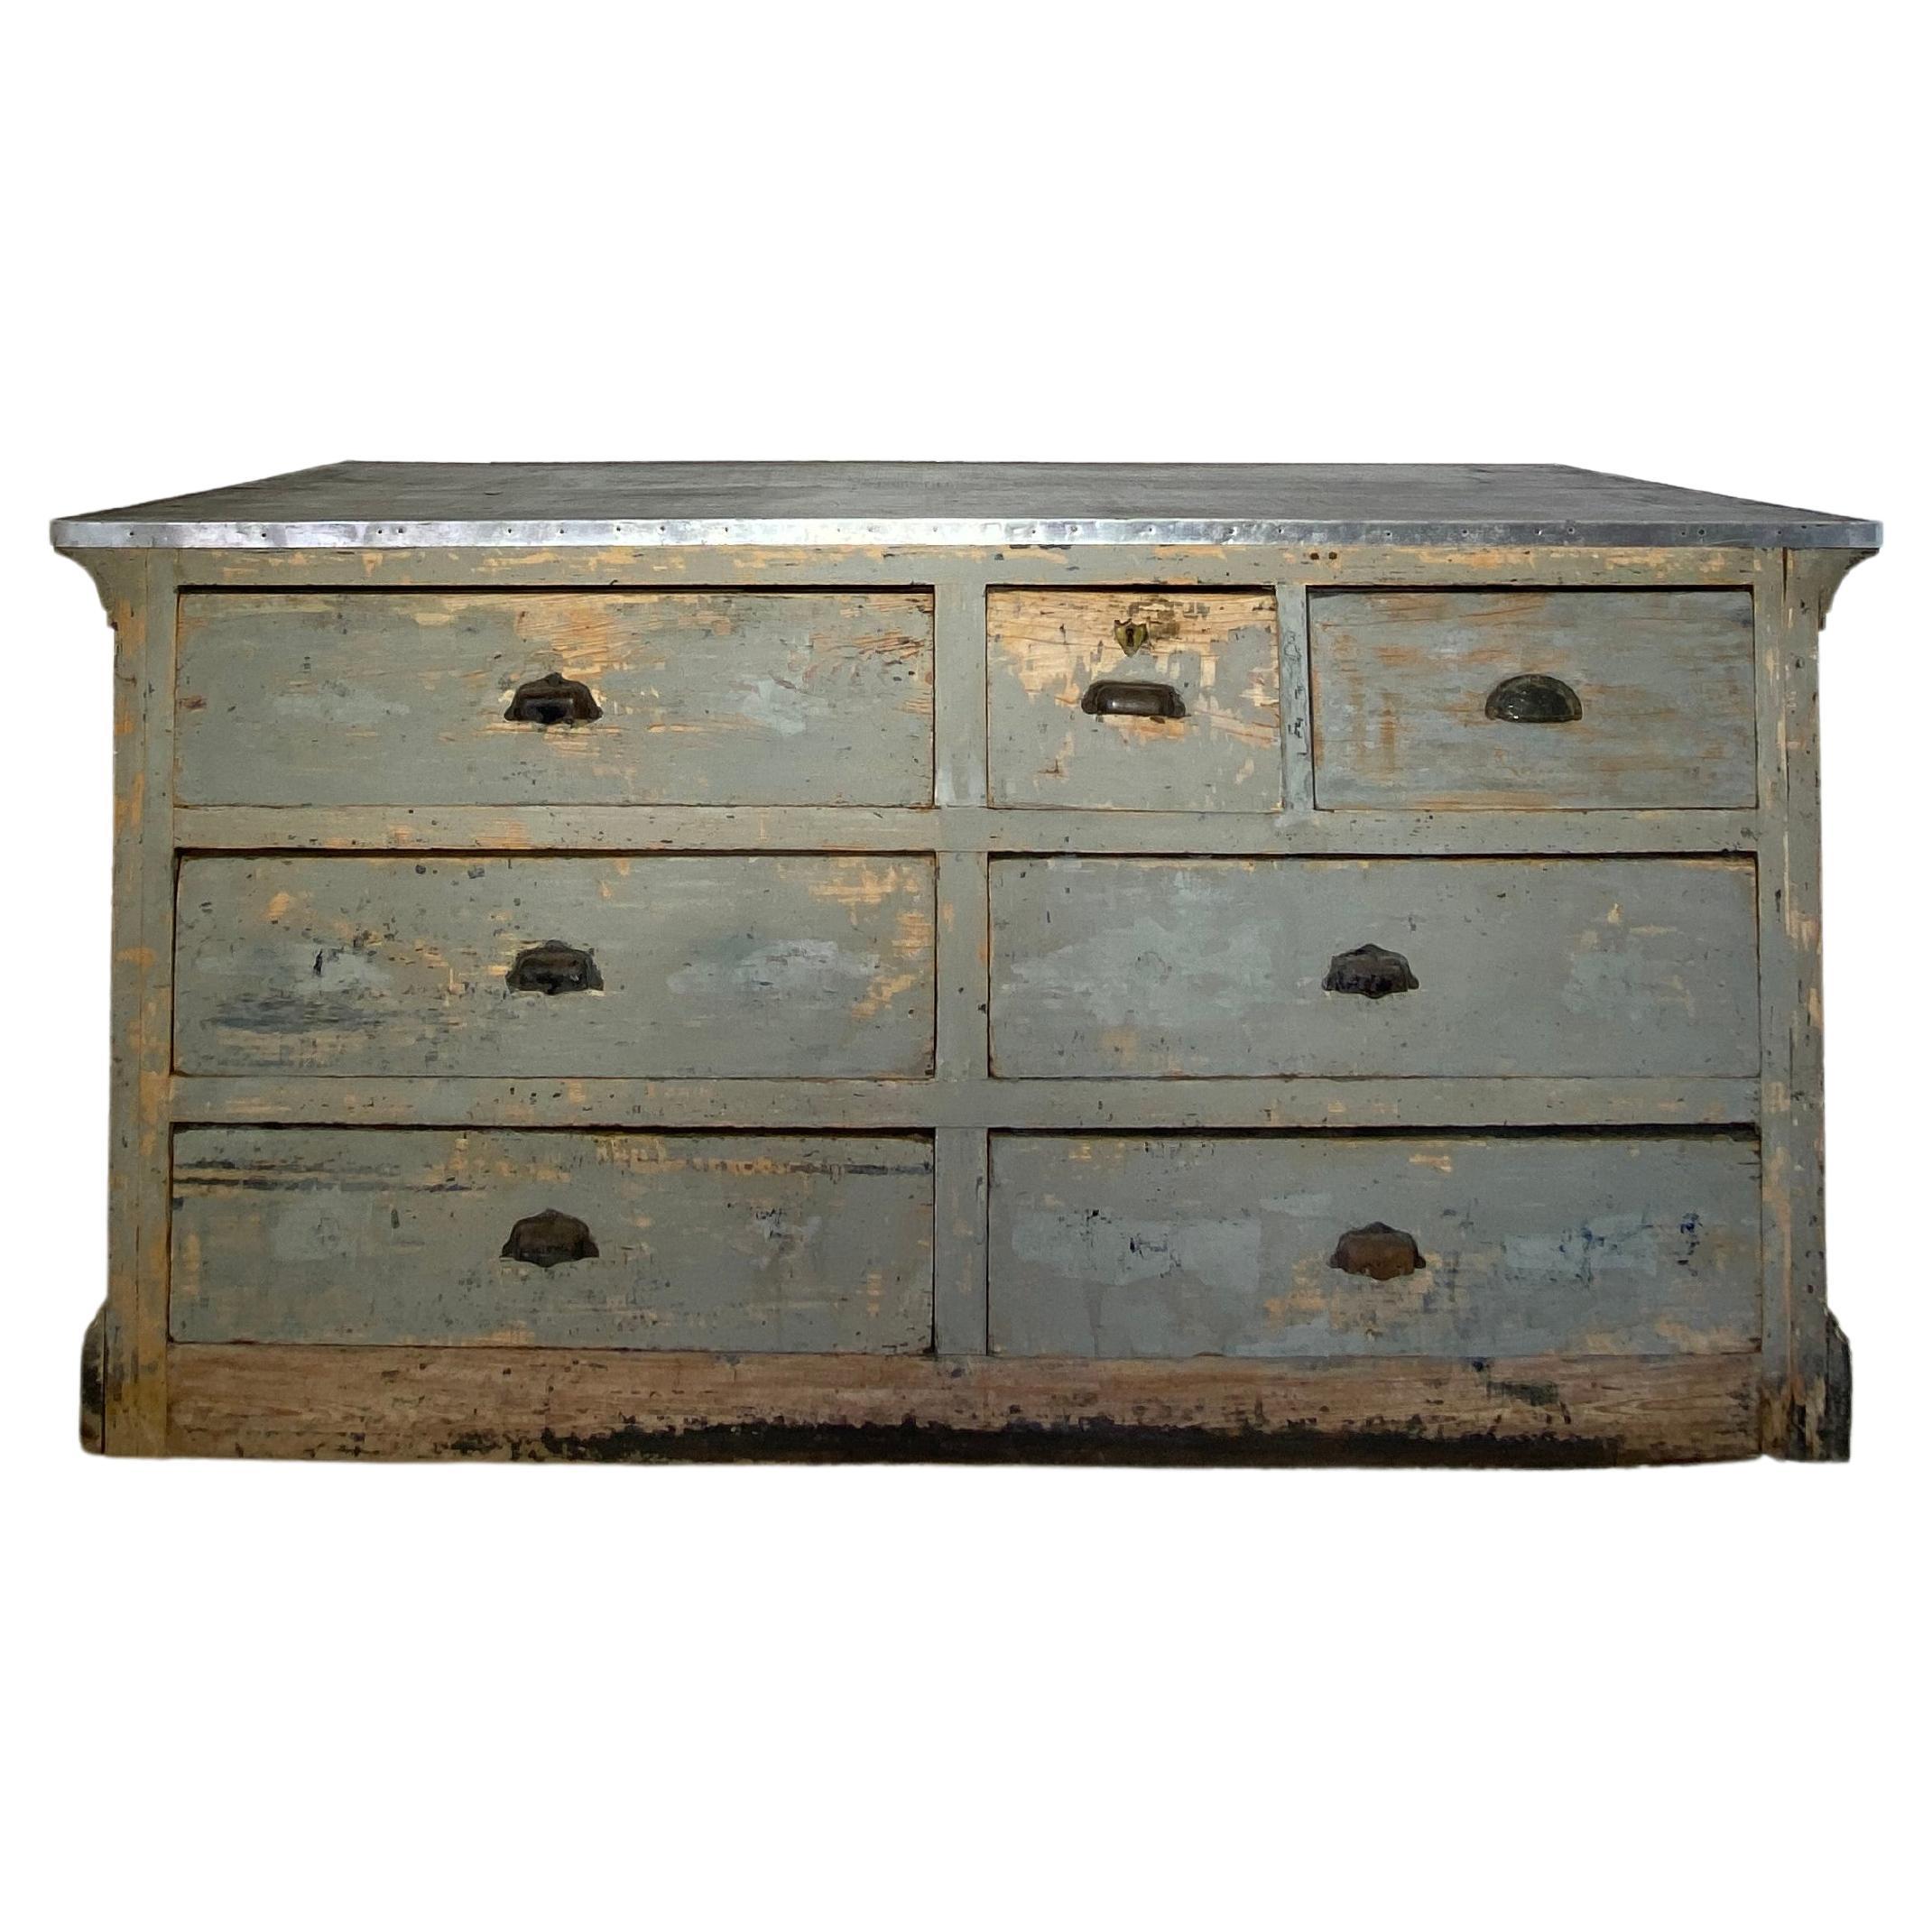 Early 19th Century Painted Store Counter